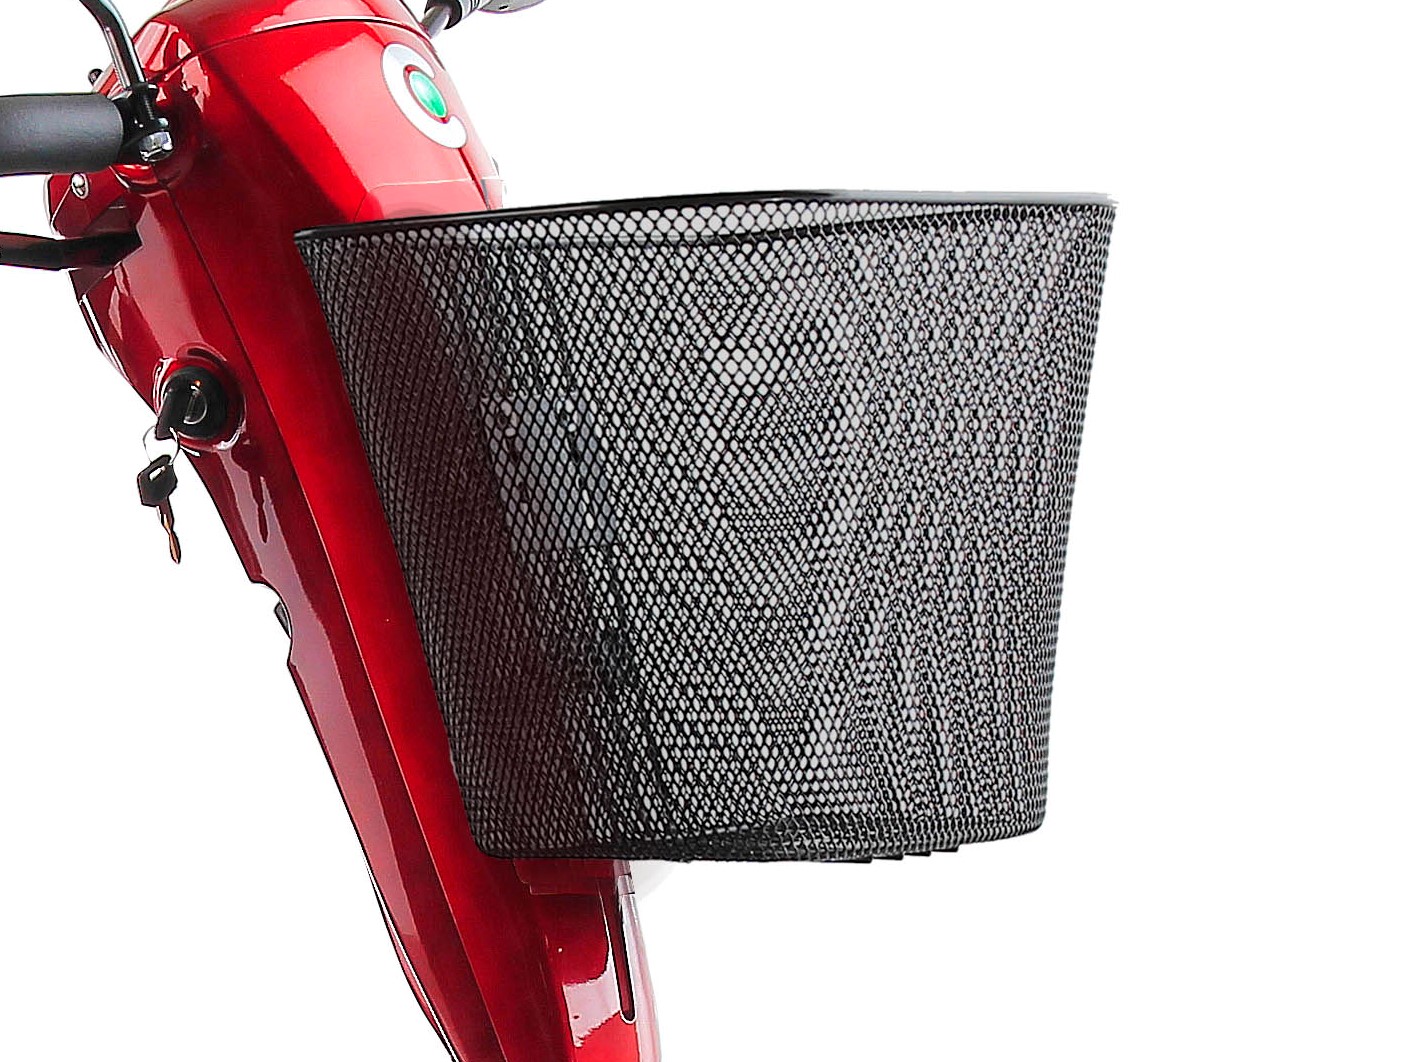 proimages/products/Electric_scooter/LY-EW402-U/EW401-_metal_basket.jpg